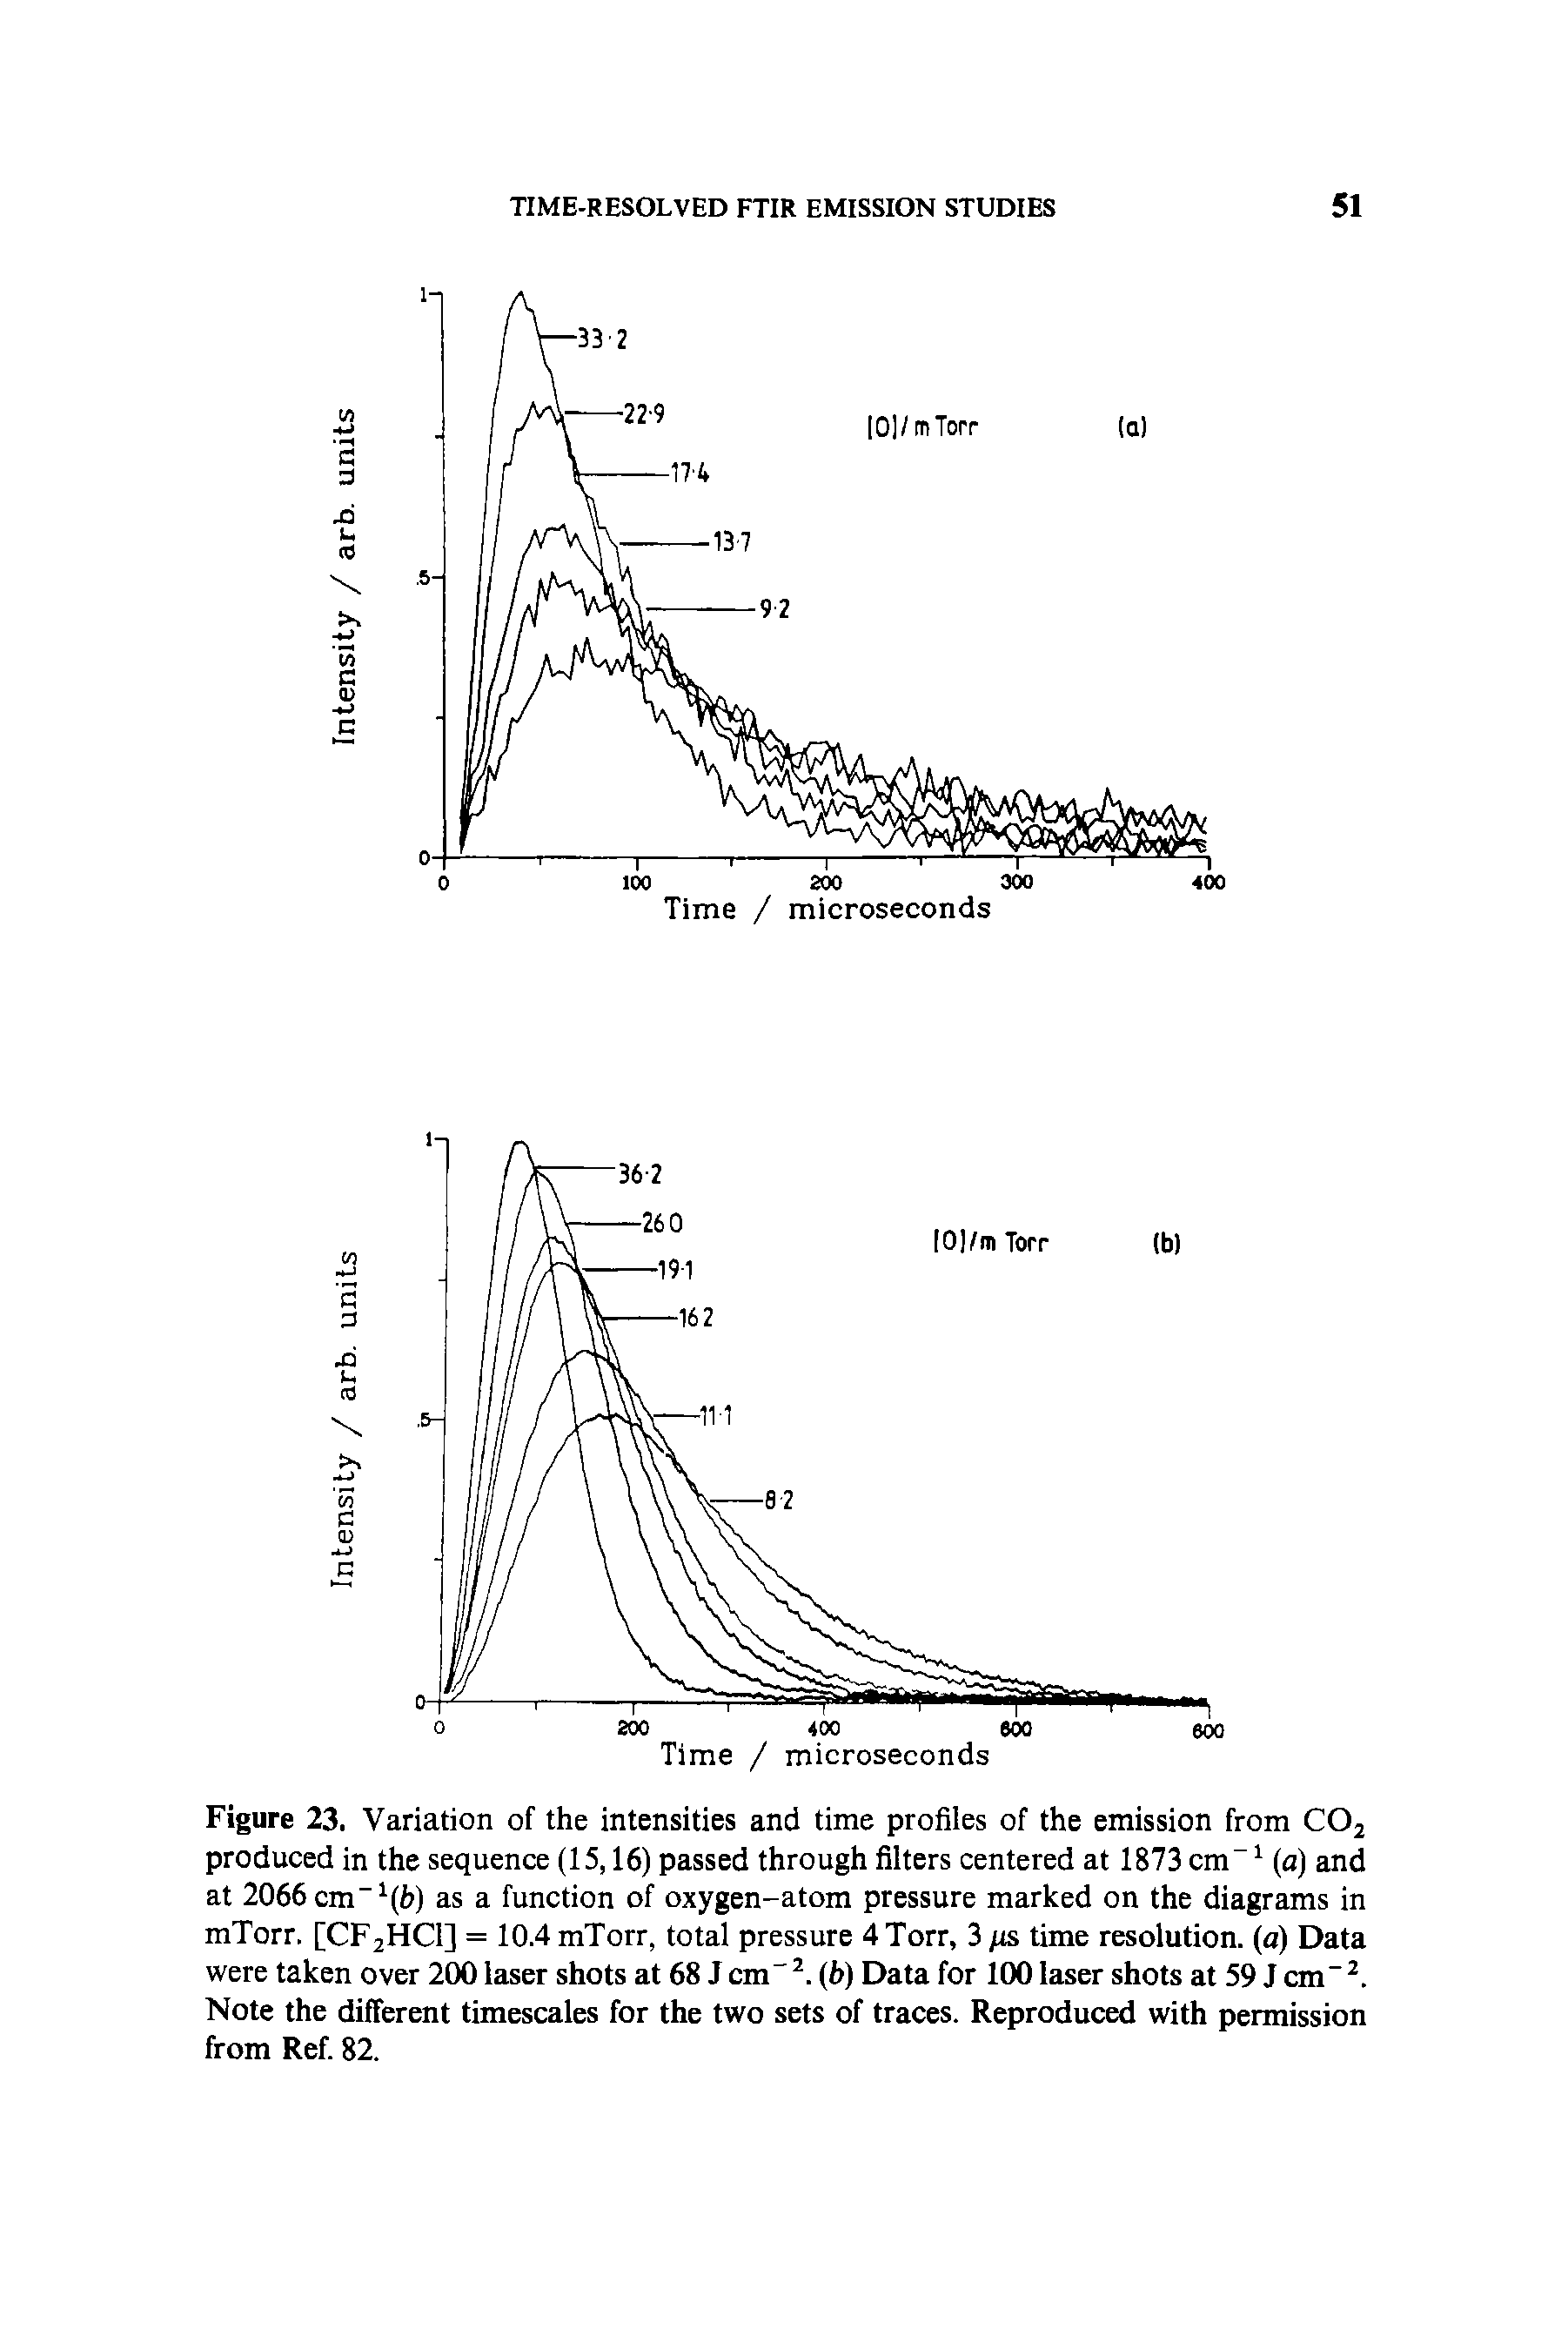 Figure 23. Variation of the intensities and time profiles of the emission from C02 produced in the sequence (15,16) passed through filters centered at 1873 cm-1 (a) and at 2066 cm" 1(b) as a function of oxygen-atom pressure marked on the diagrams in mTorr. [CF2HC1] = 10.4 mTorr, total pressure 4 Torr, 3 time resolution, (a) Data were taken over 200 laser shots at 68 Jem-2. (b) Data for 100 laser shots at 59 J cm"2. Note the different timescales for the two sets of traces. Reproduced with permission from Ref. 82.